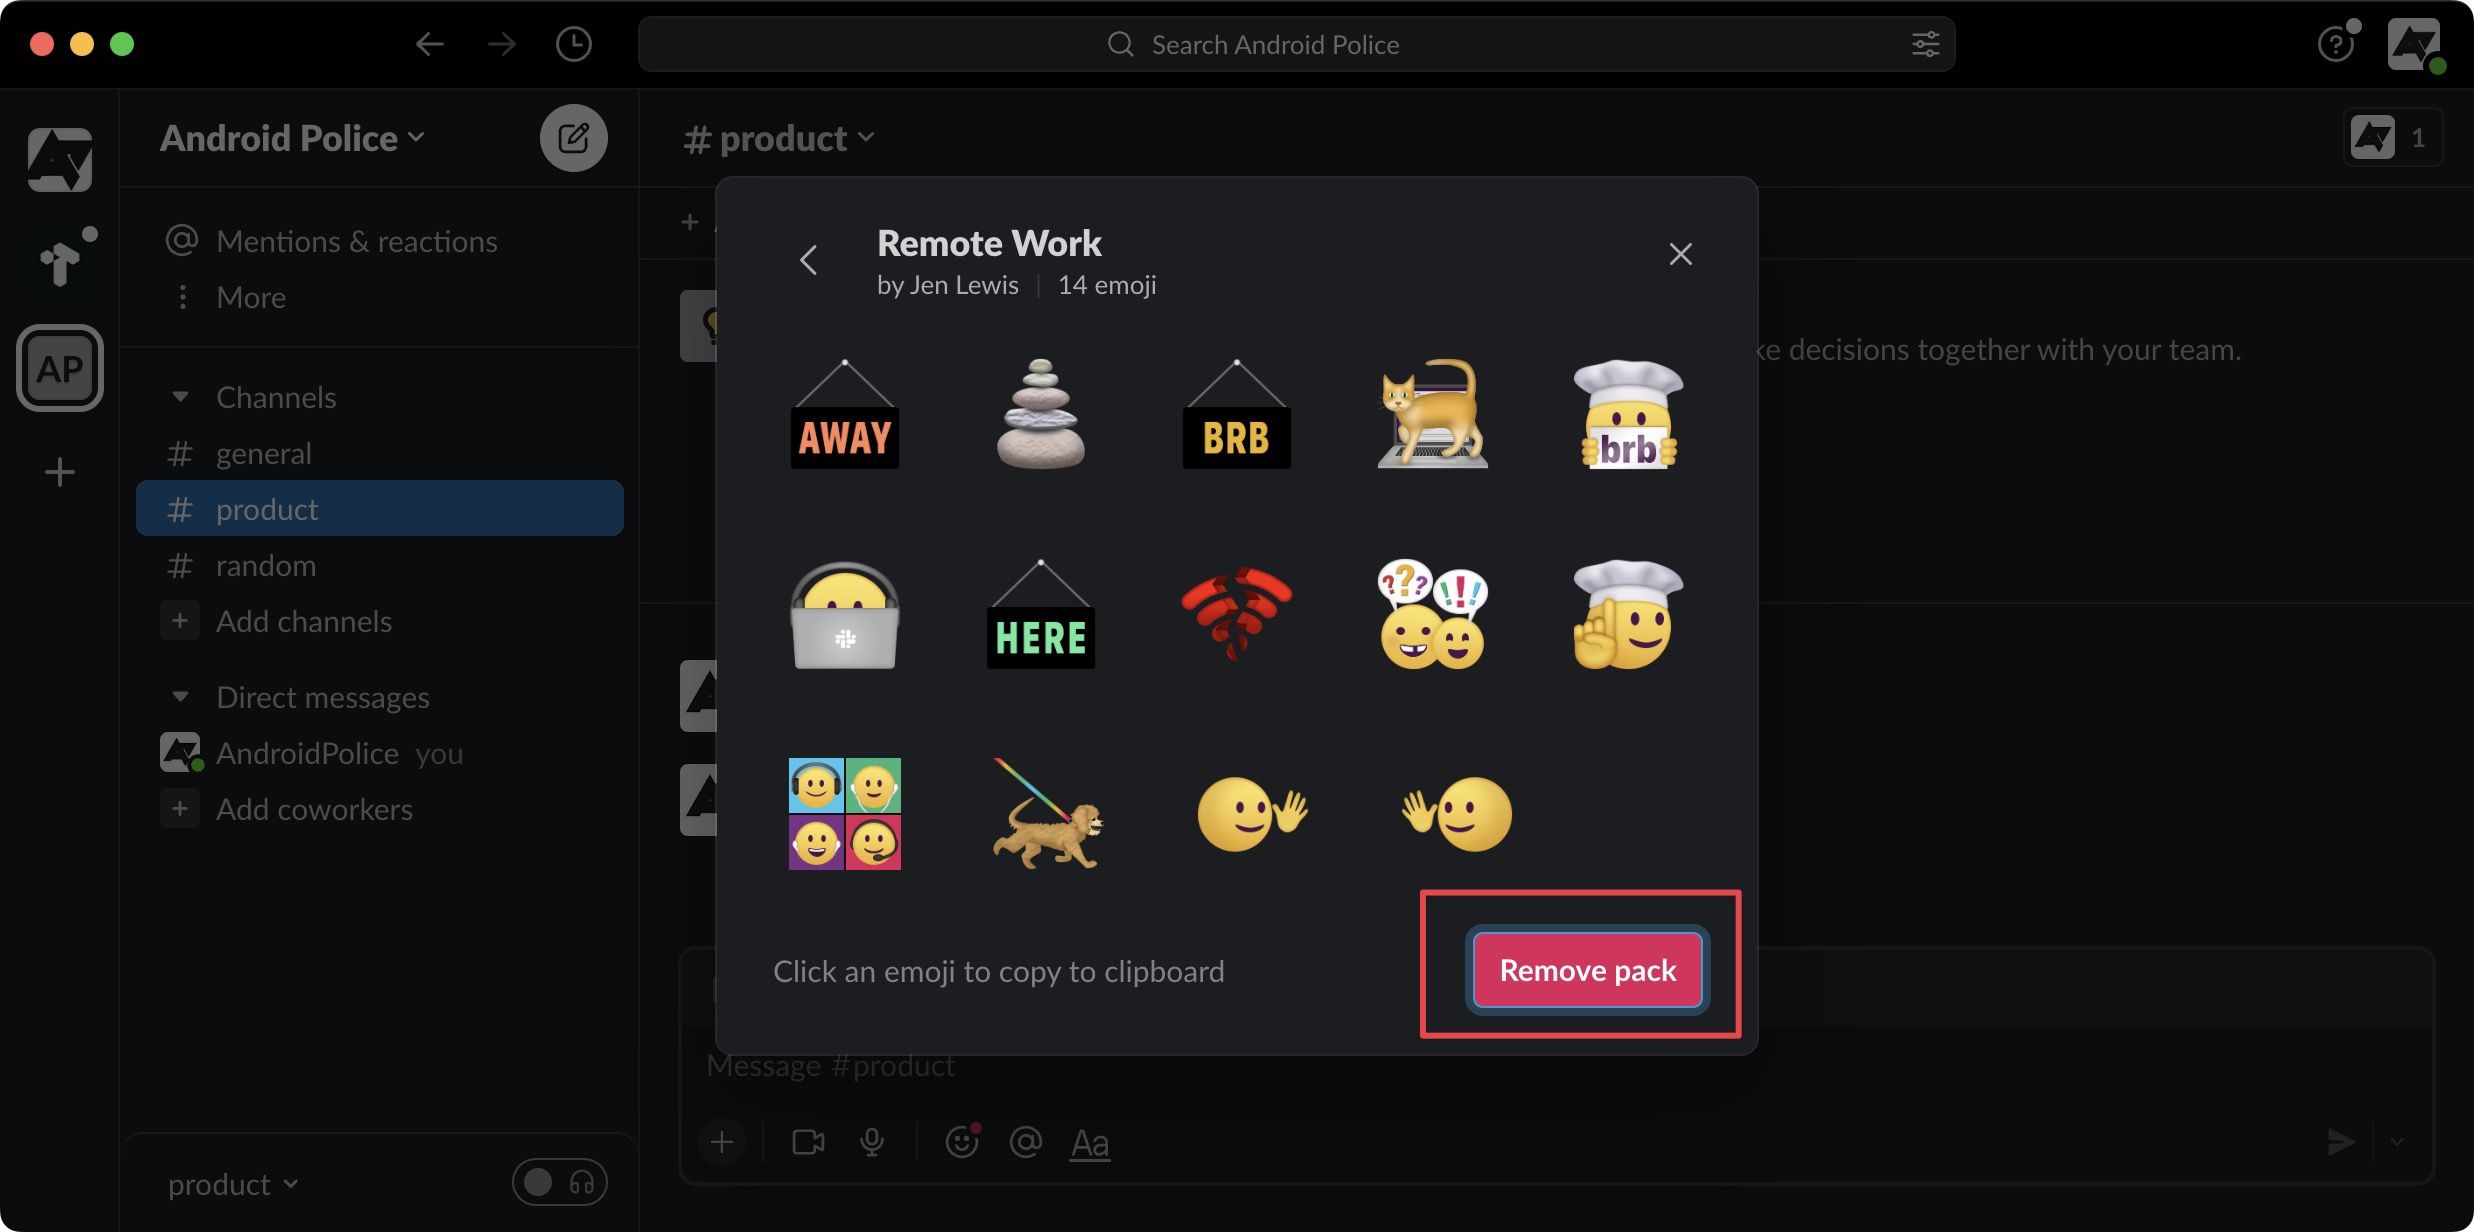  pop-up window displaying custom emojis, with the 'Remove Pack' option prominently highlighted in red.